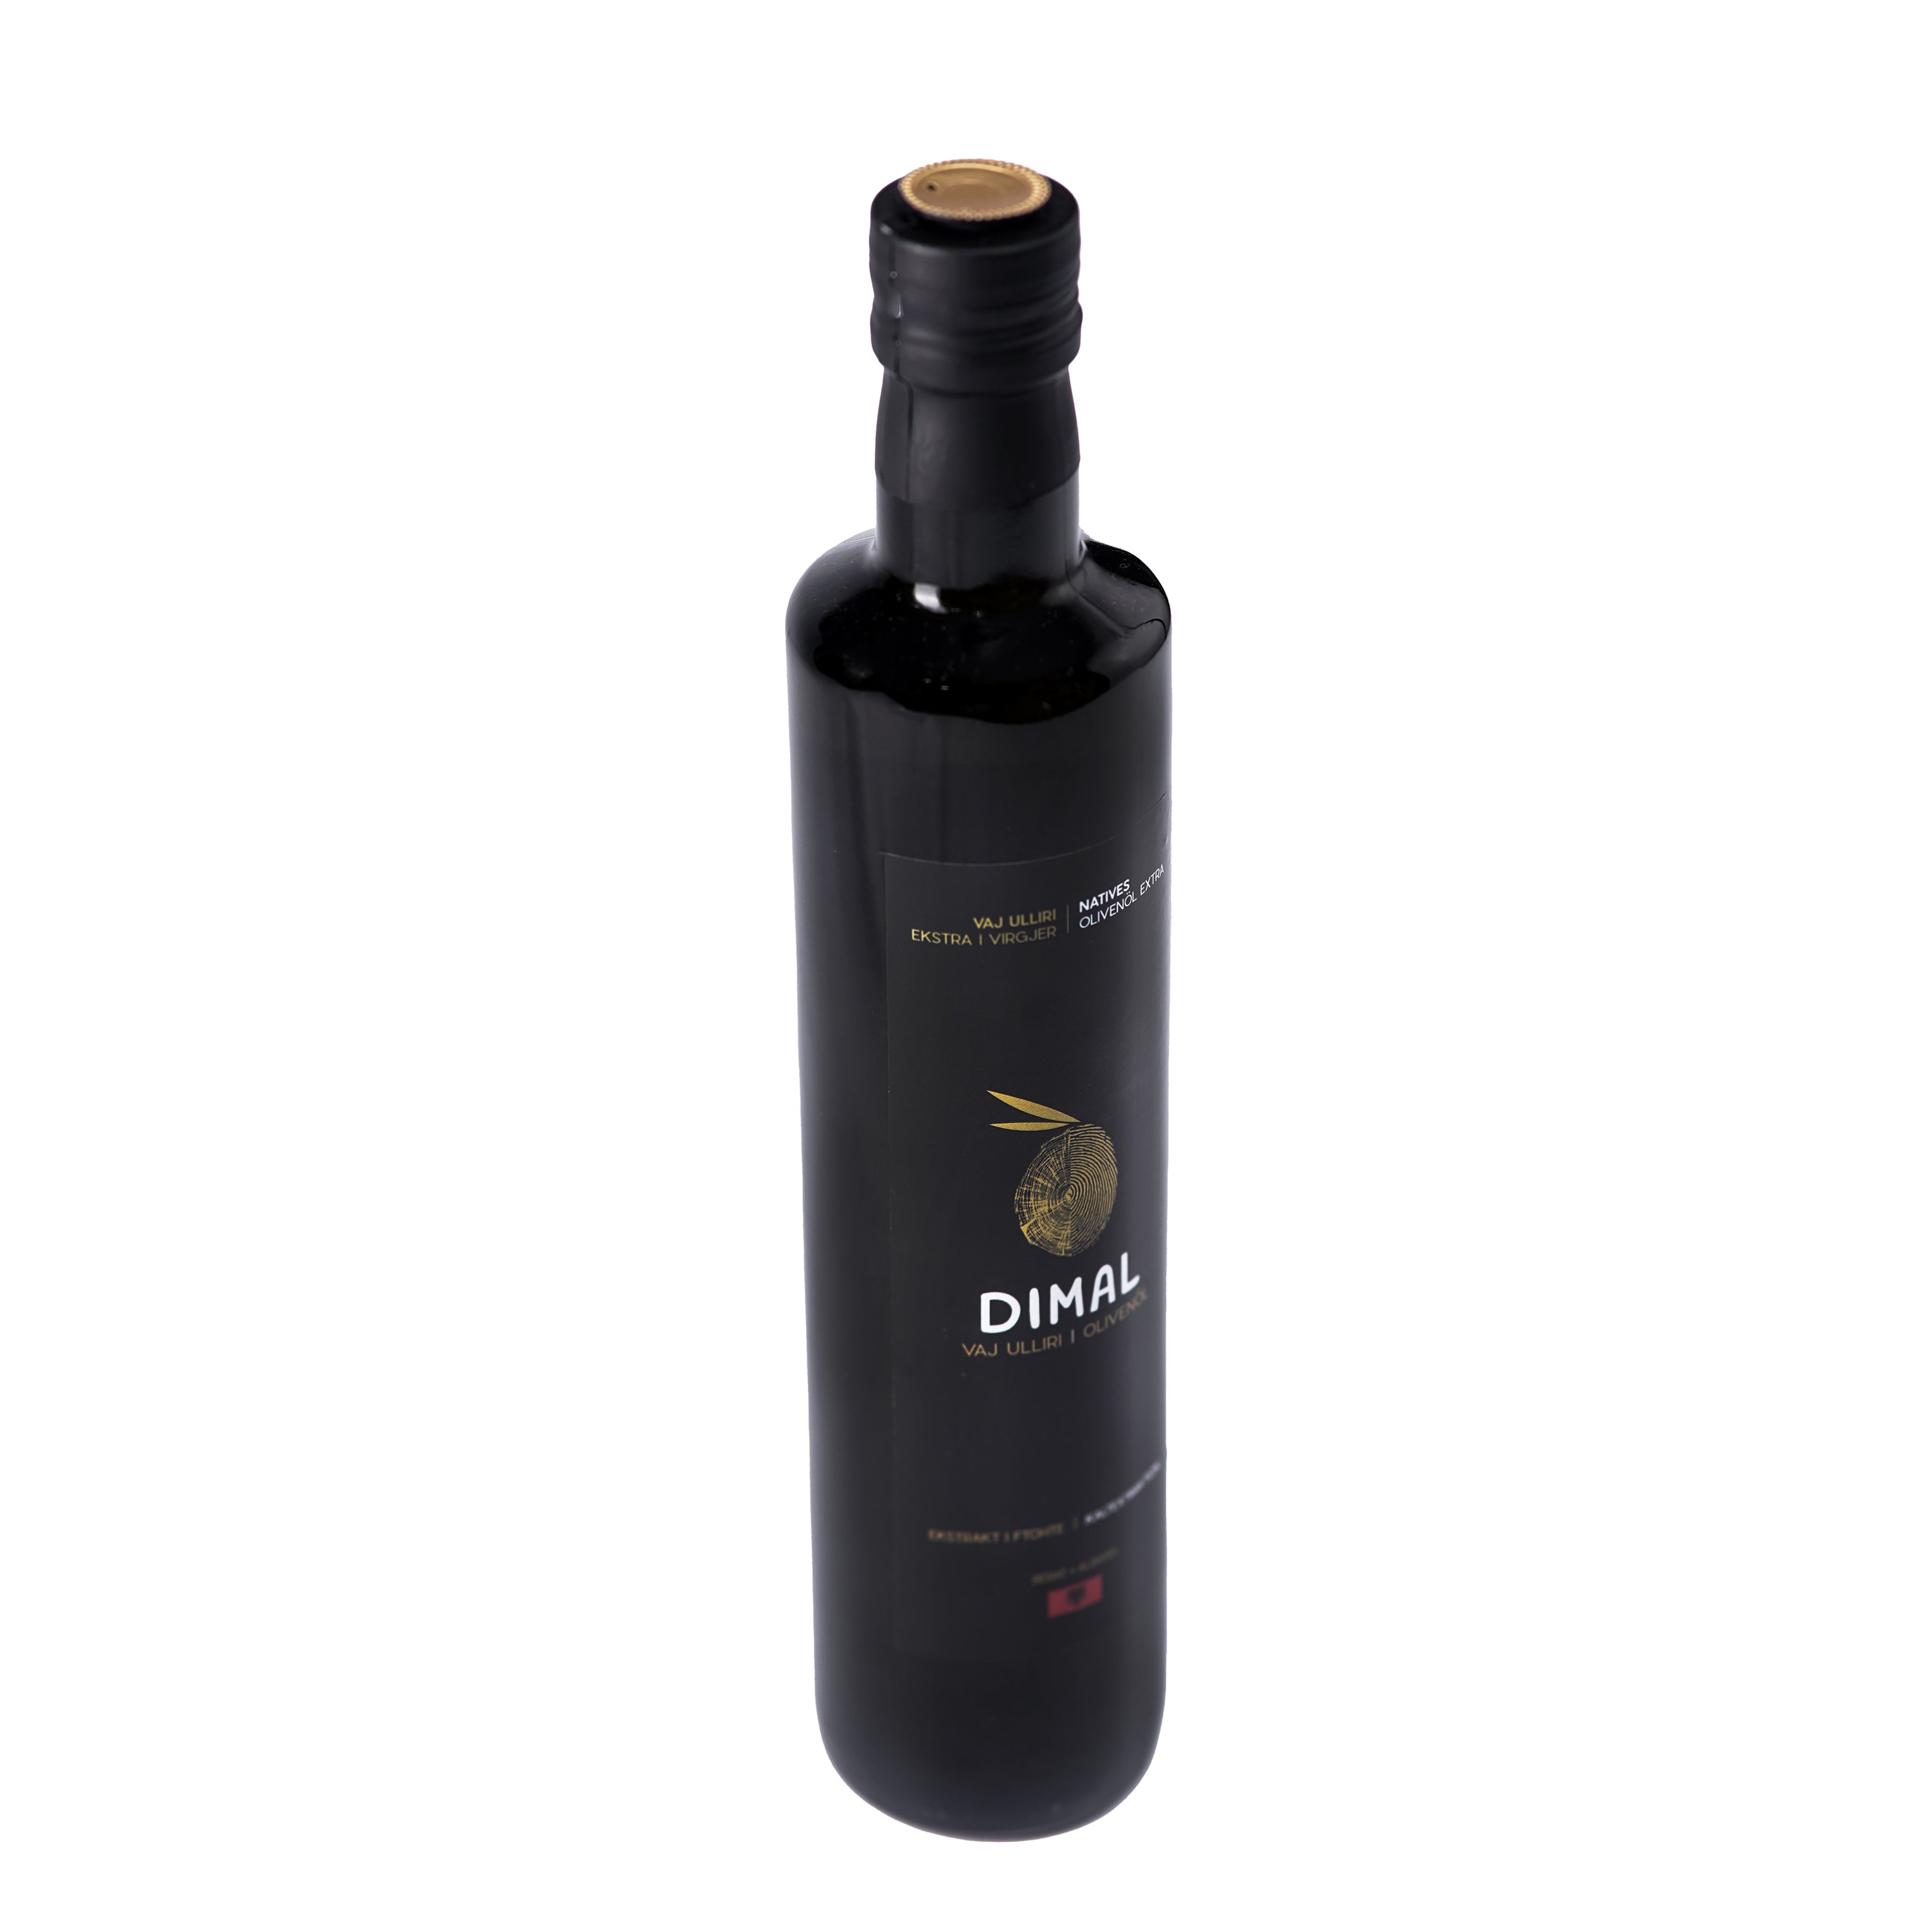 Dimal Extra Virgin Olive Oil from Albania - 500ml